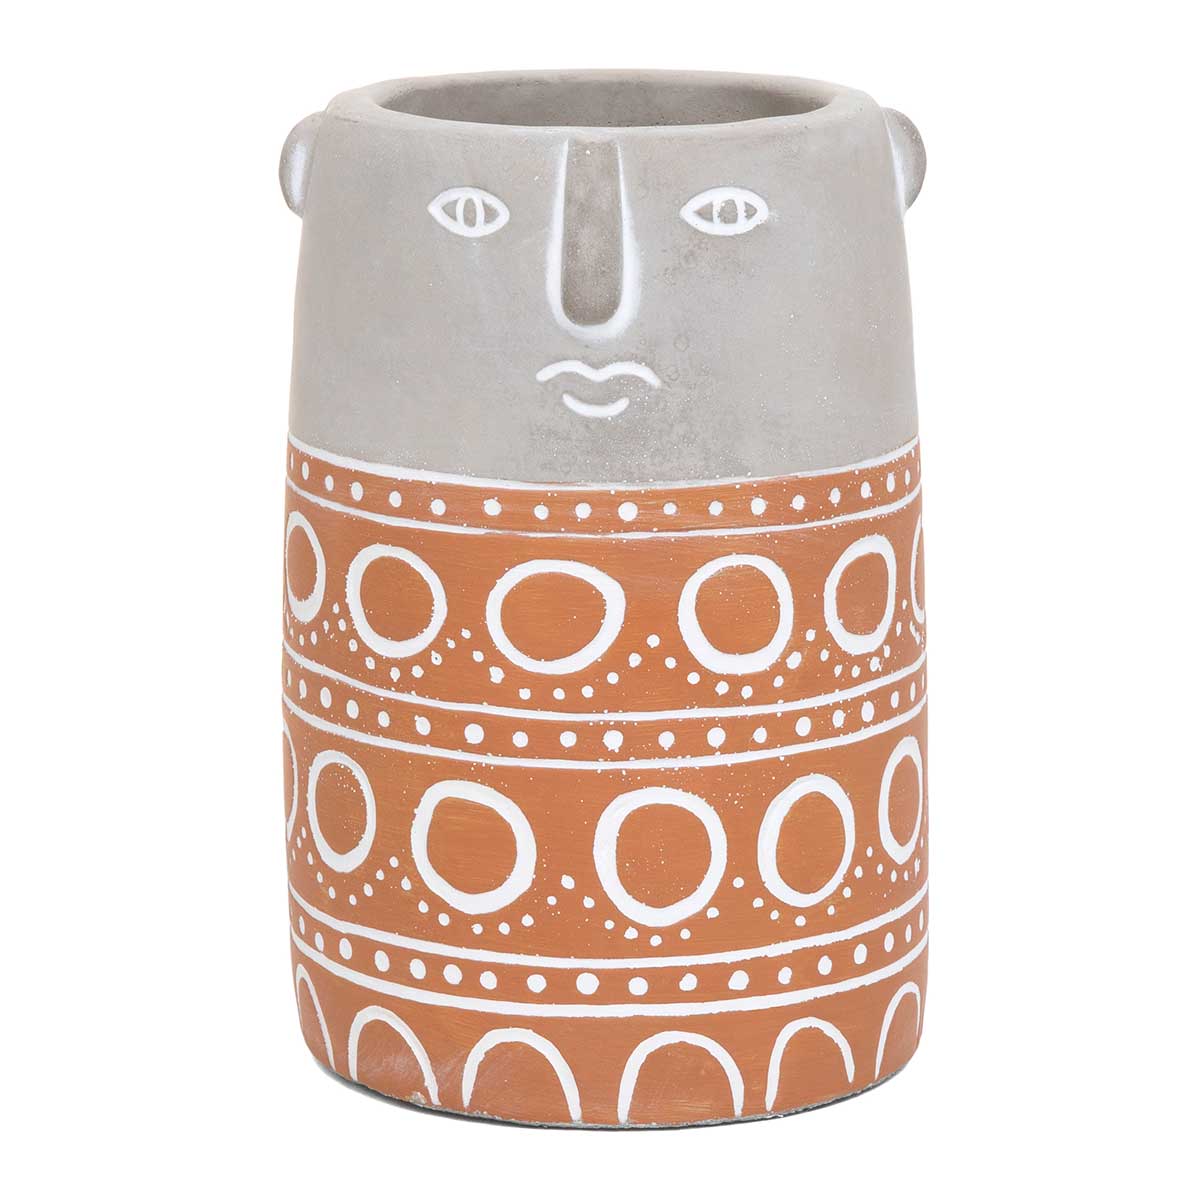 POT PERUVIAN FACE CIRCLE TALL 4.5IN X 7IN CLAY/GREY CONCRETE - Click Image to Close